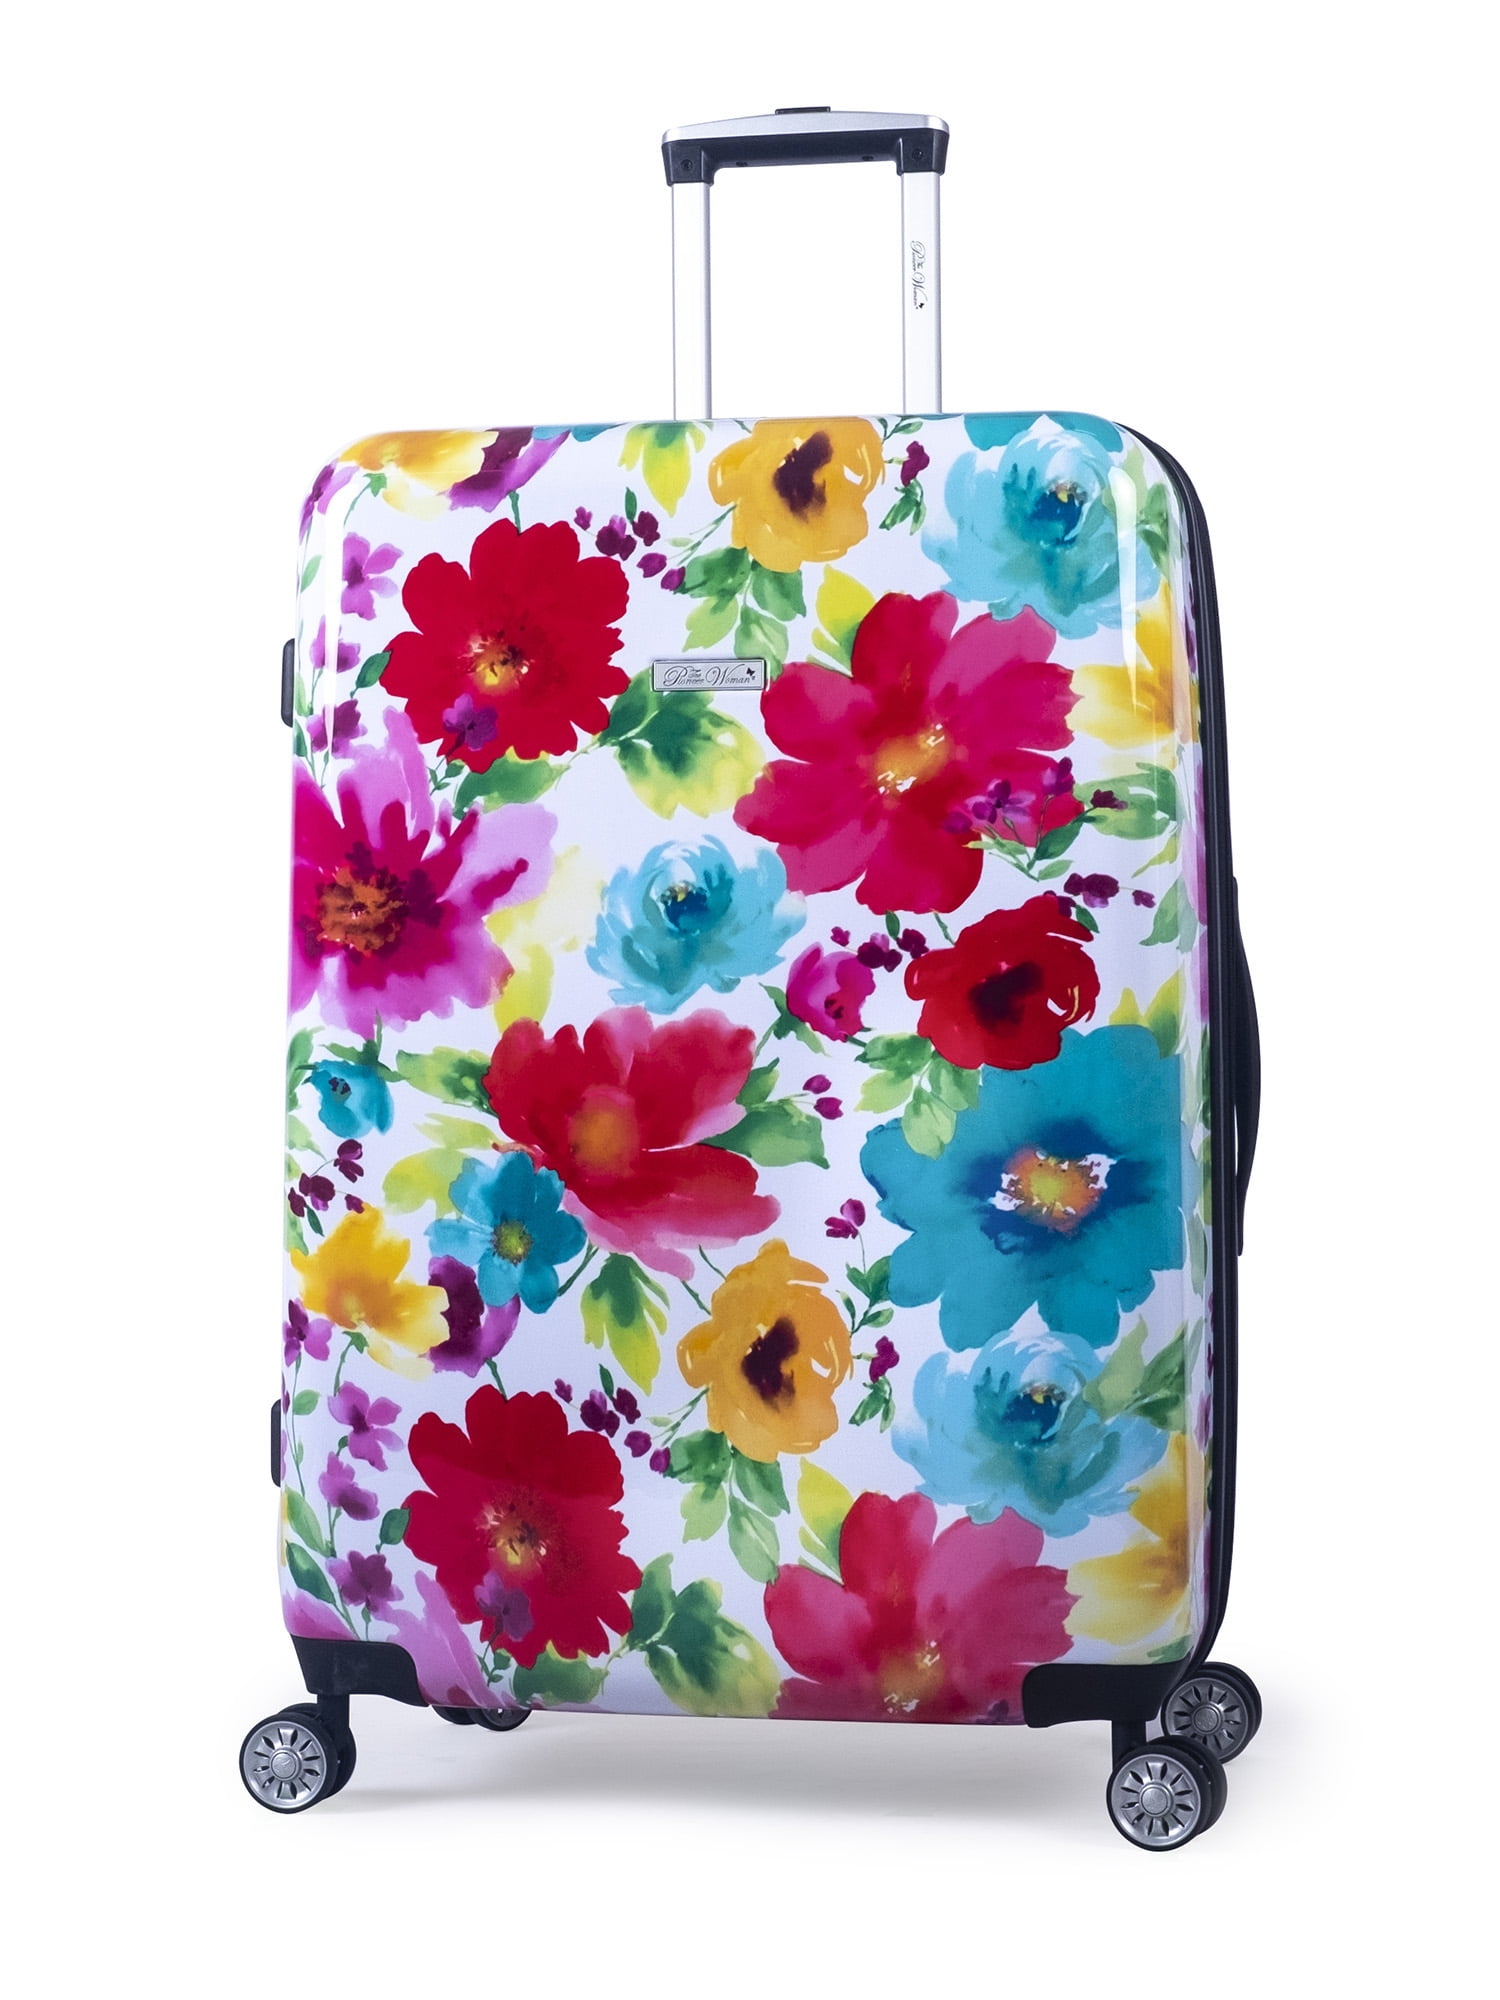 U LIFE Red Roses Floral Flowers Luggage Suitcase Cover Protector for Men Women 